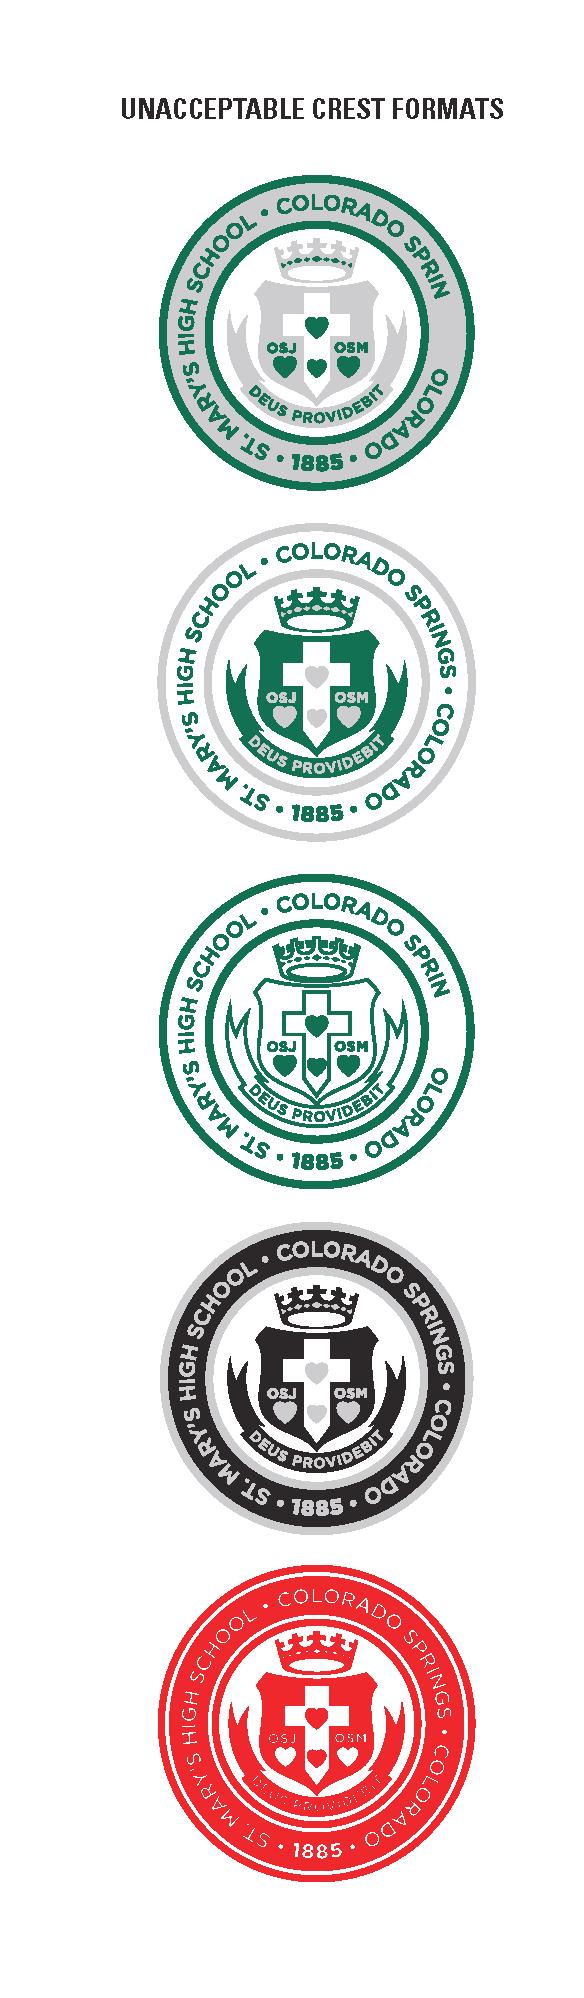 6 Branding Standards Crest do s and dont s: DO Contact the Marketing Communications Department for assistance or guidance on the appropriate use of the St. Mary s High School crest.